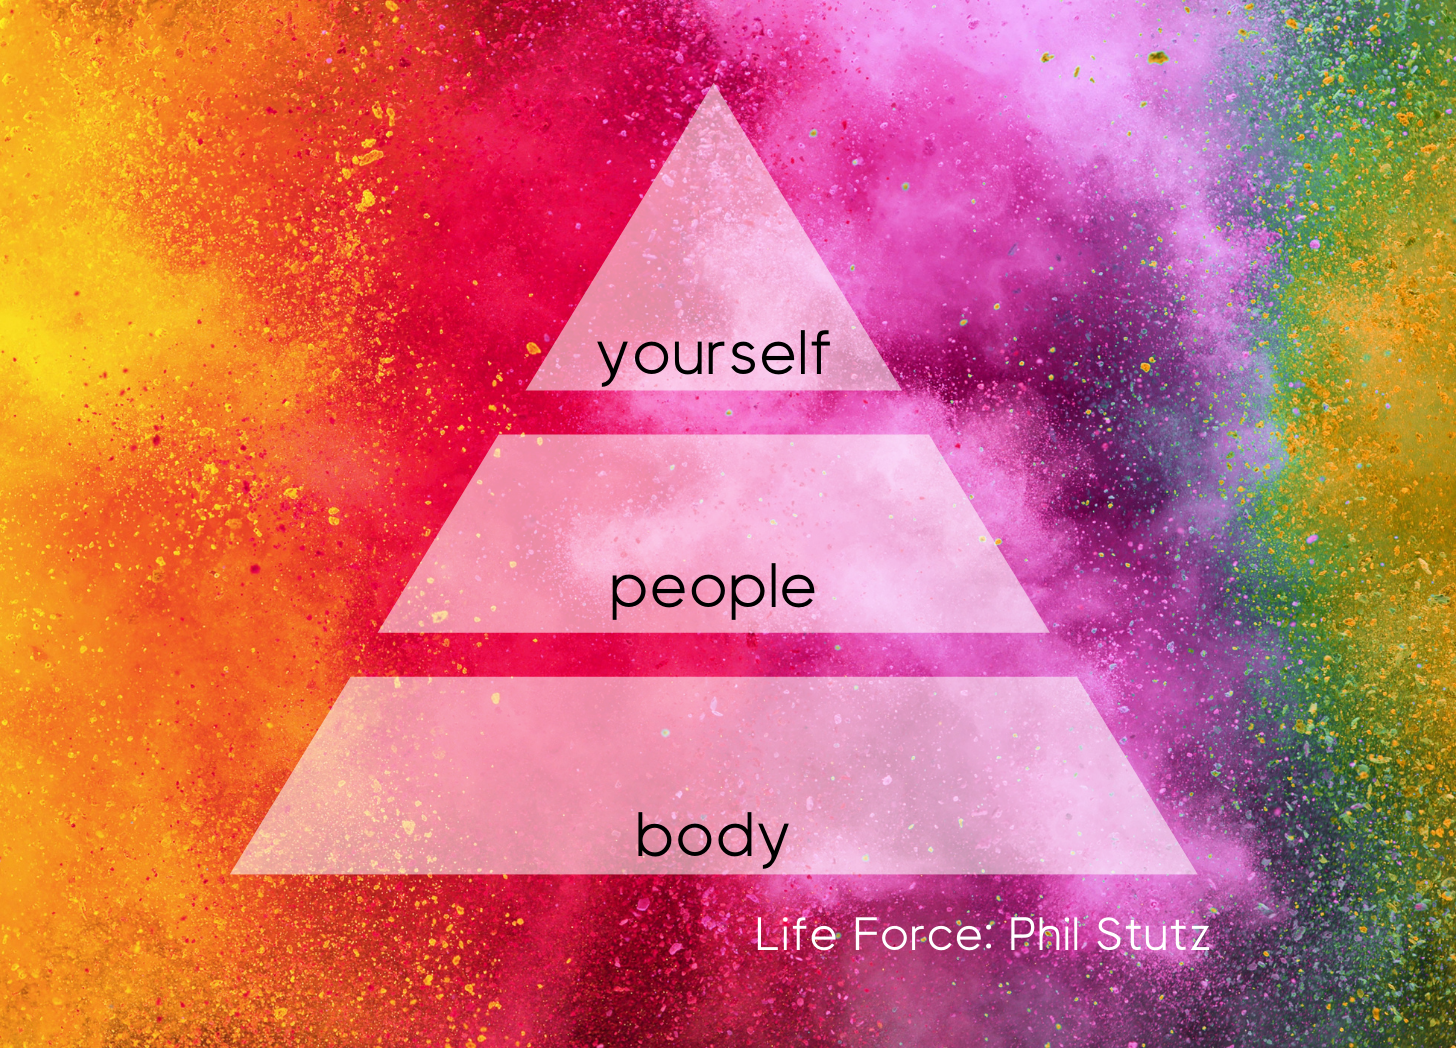 Tie dye background with a transparent white triangle on top split into three sections: body at the bottom, people in the middle, and yourself at the top. The bottom reads: Life Force Phil Stutz.